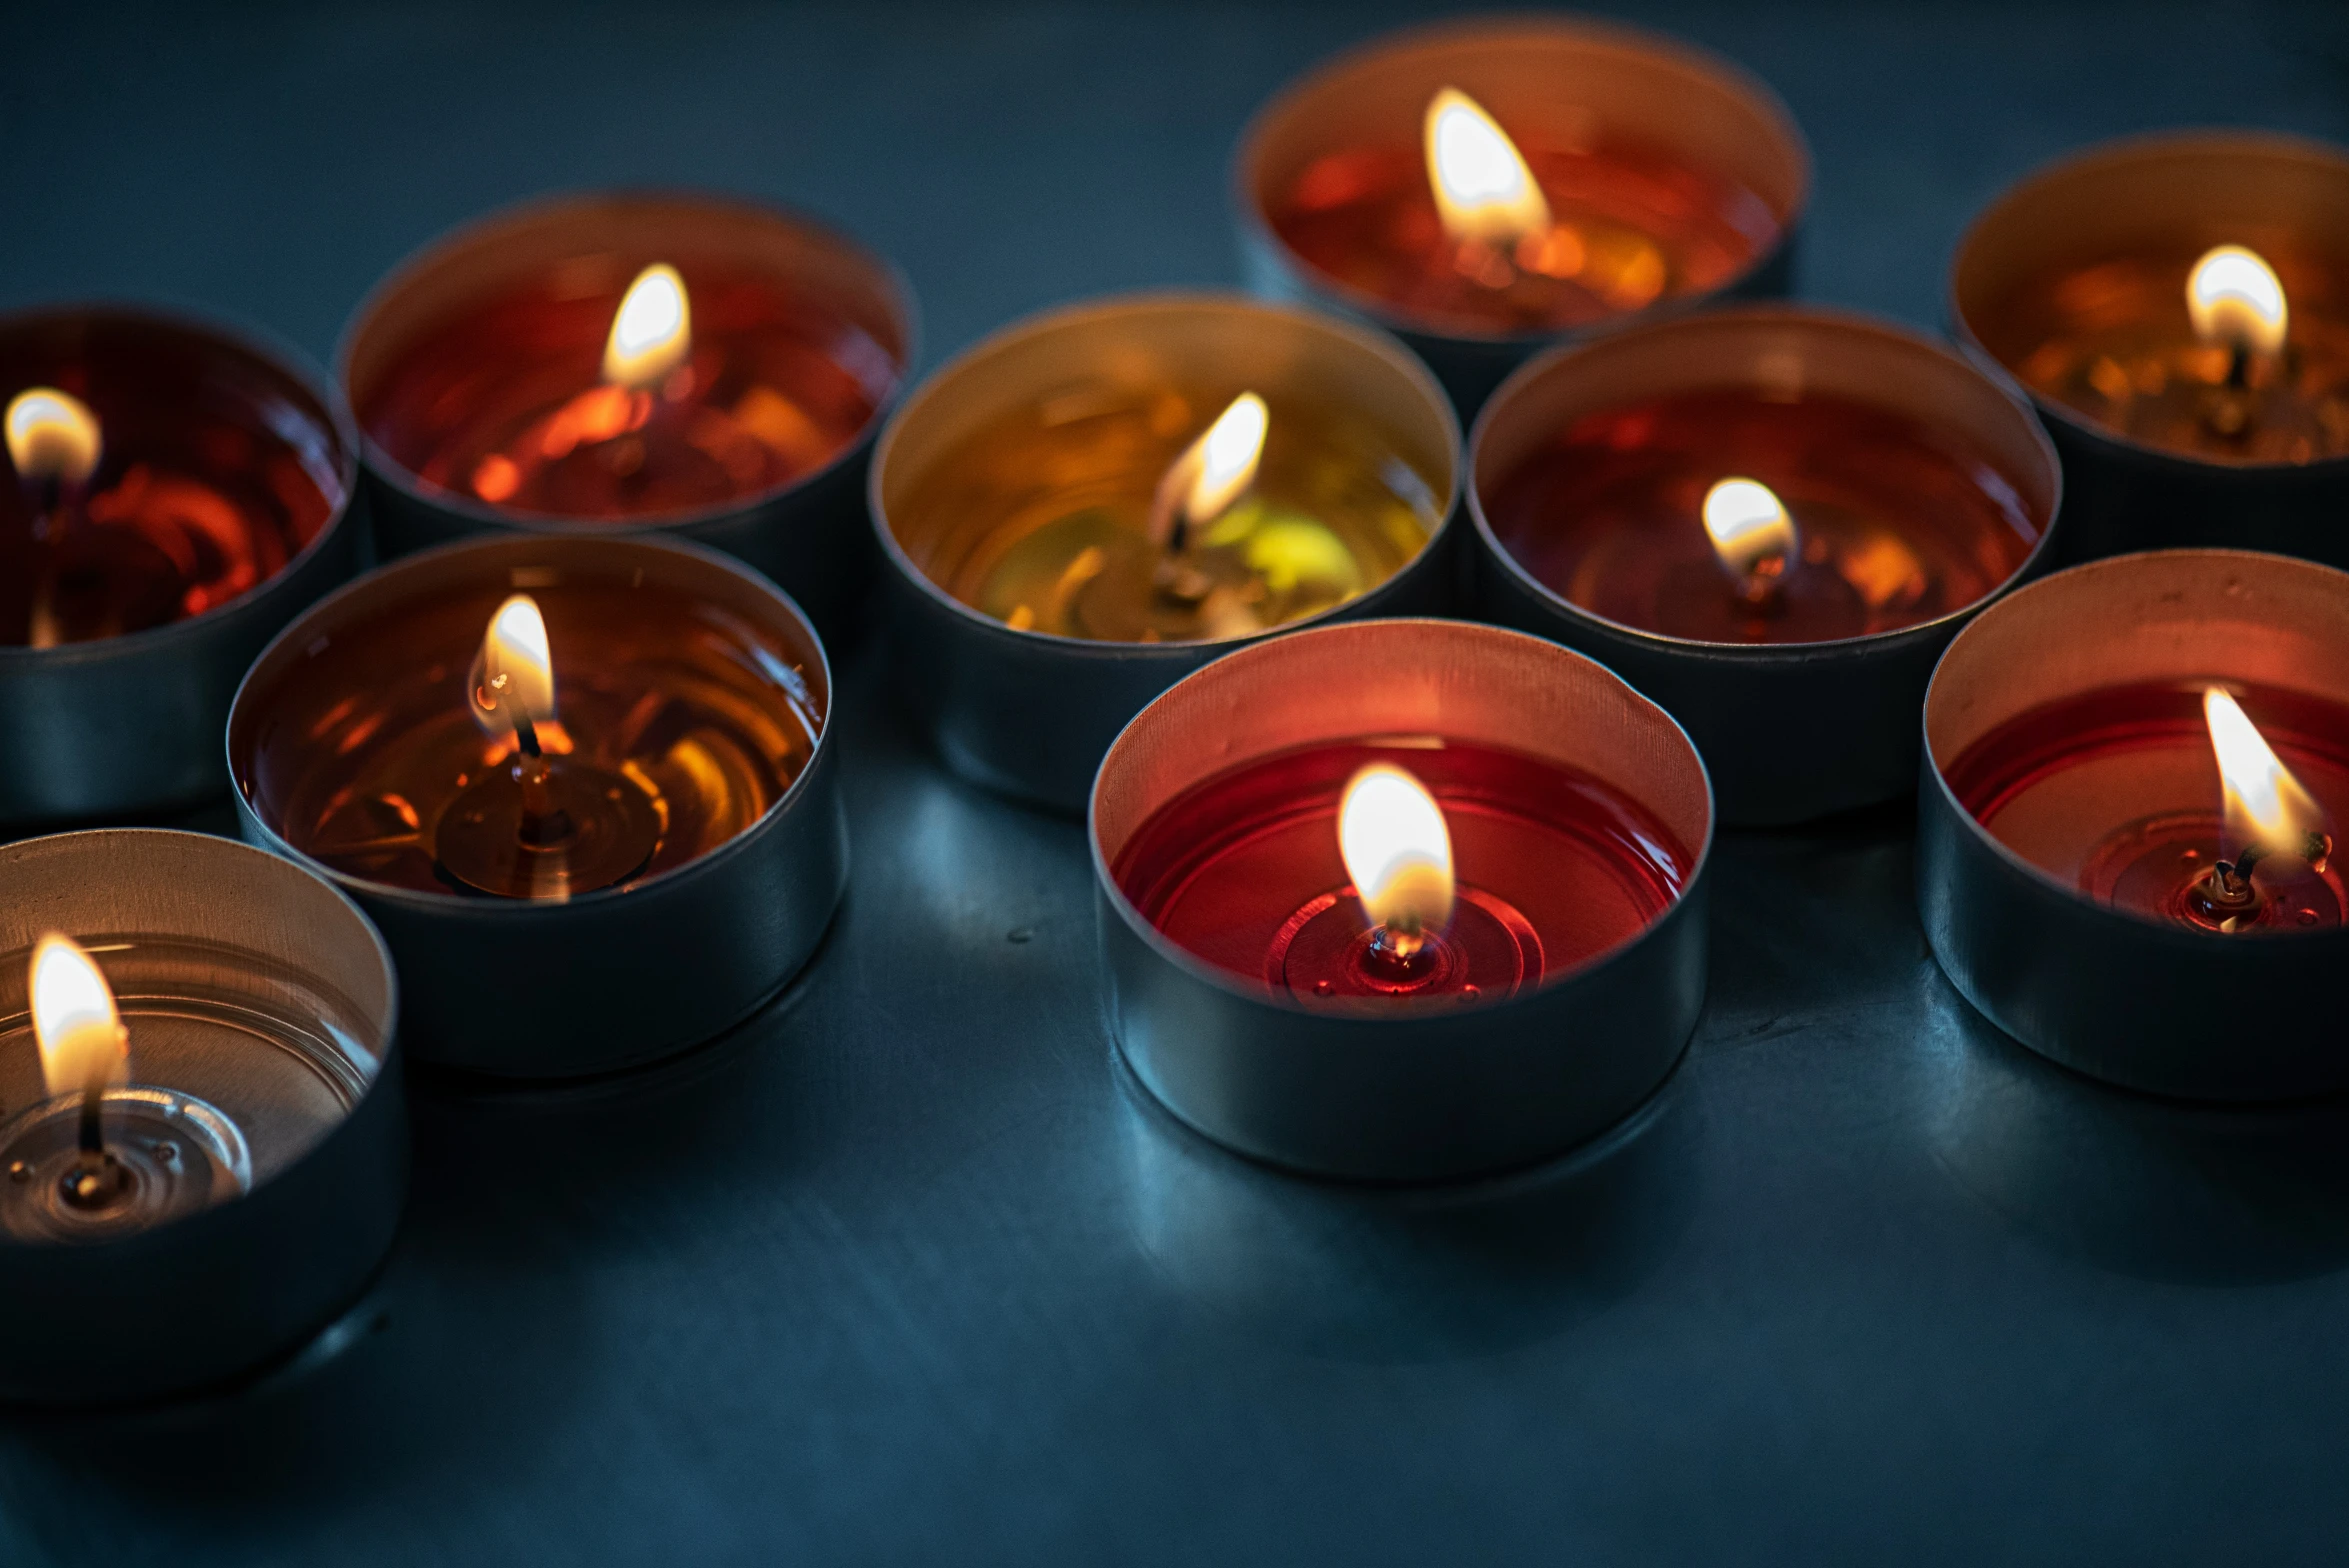 many different candles are lit in several bowls